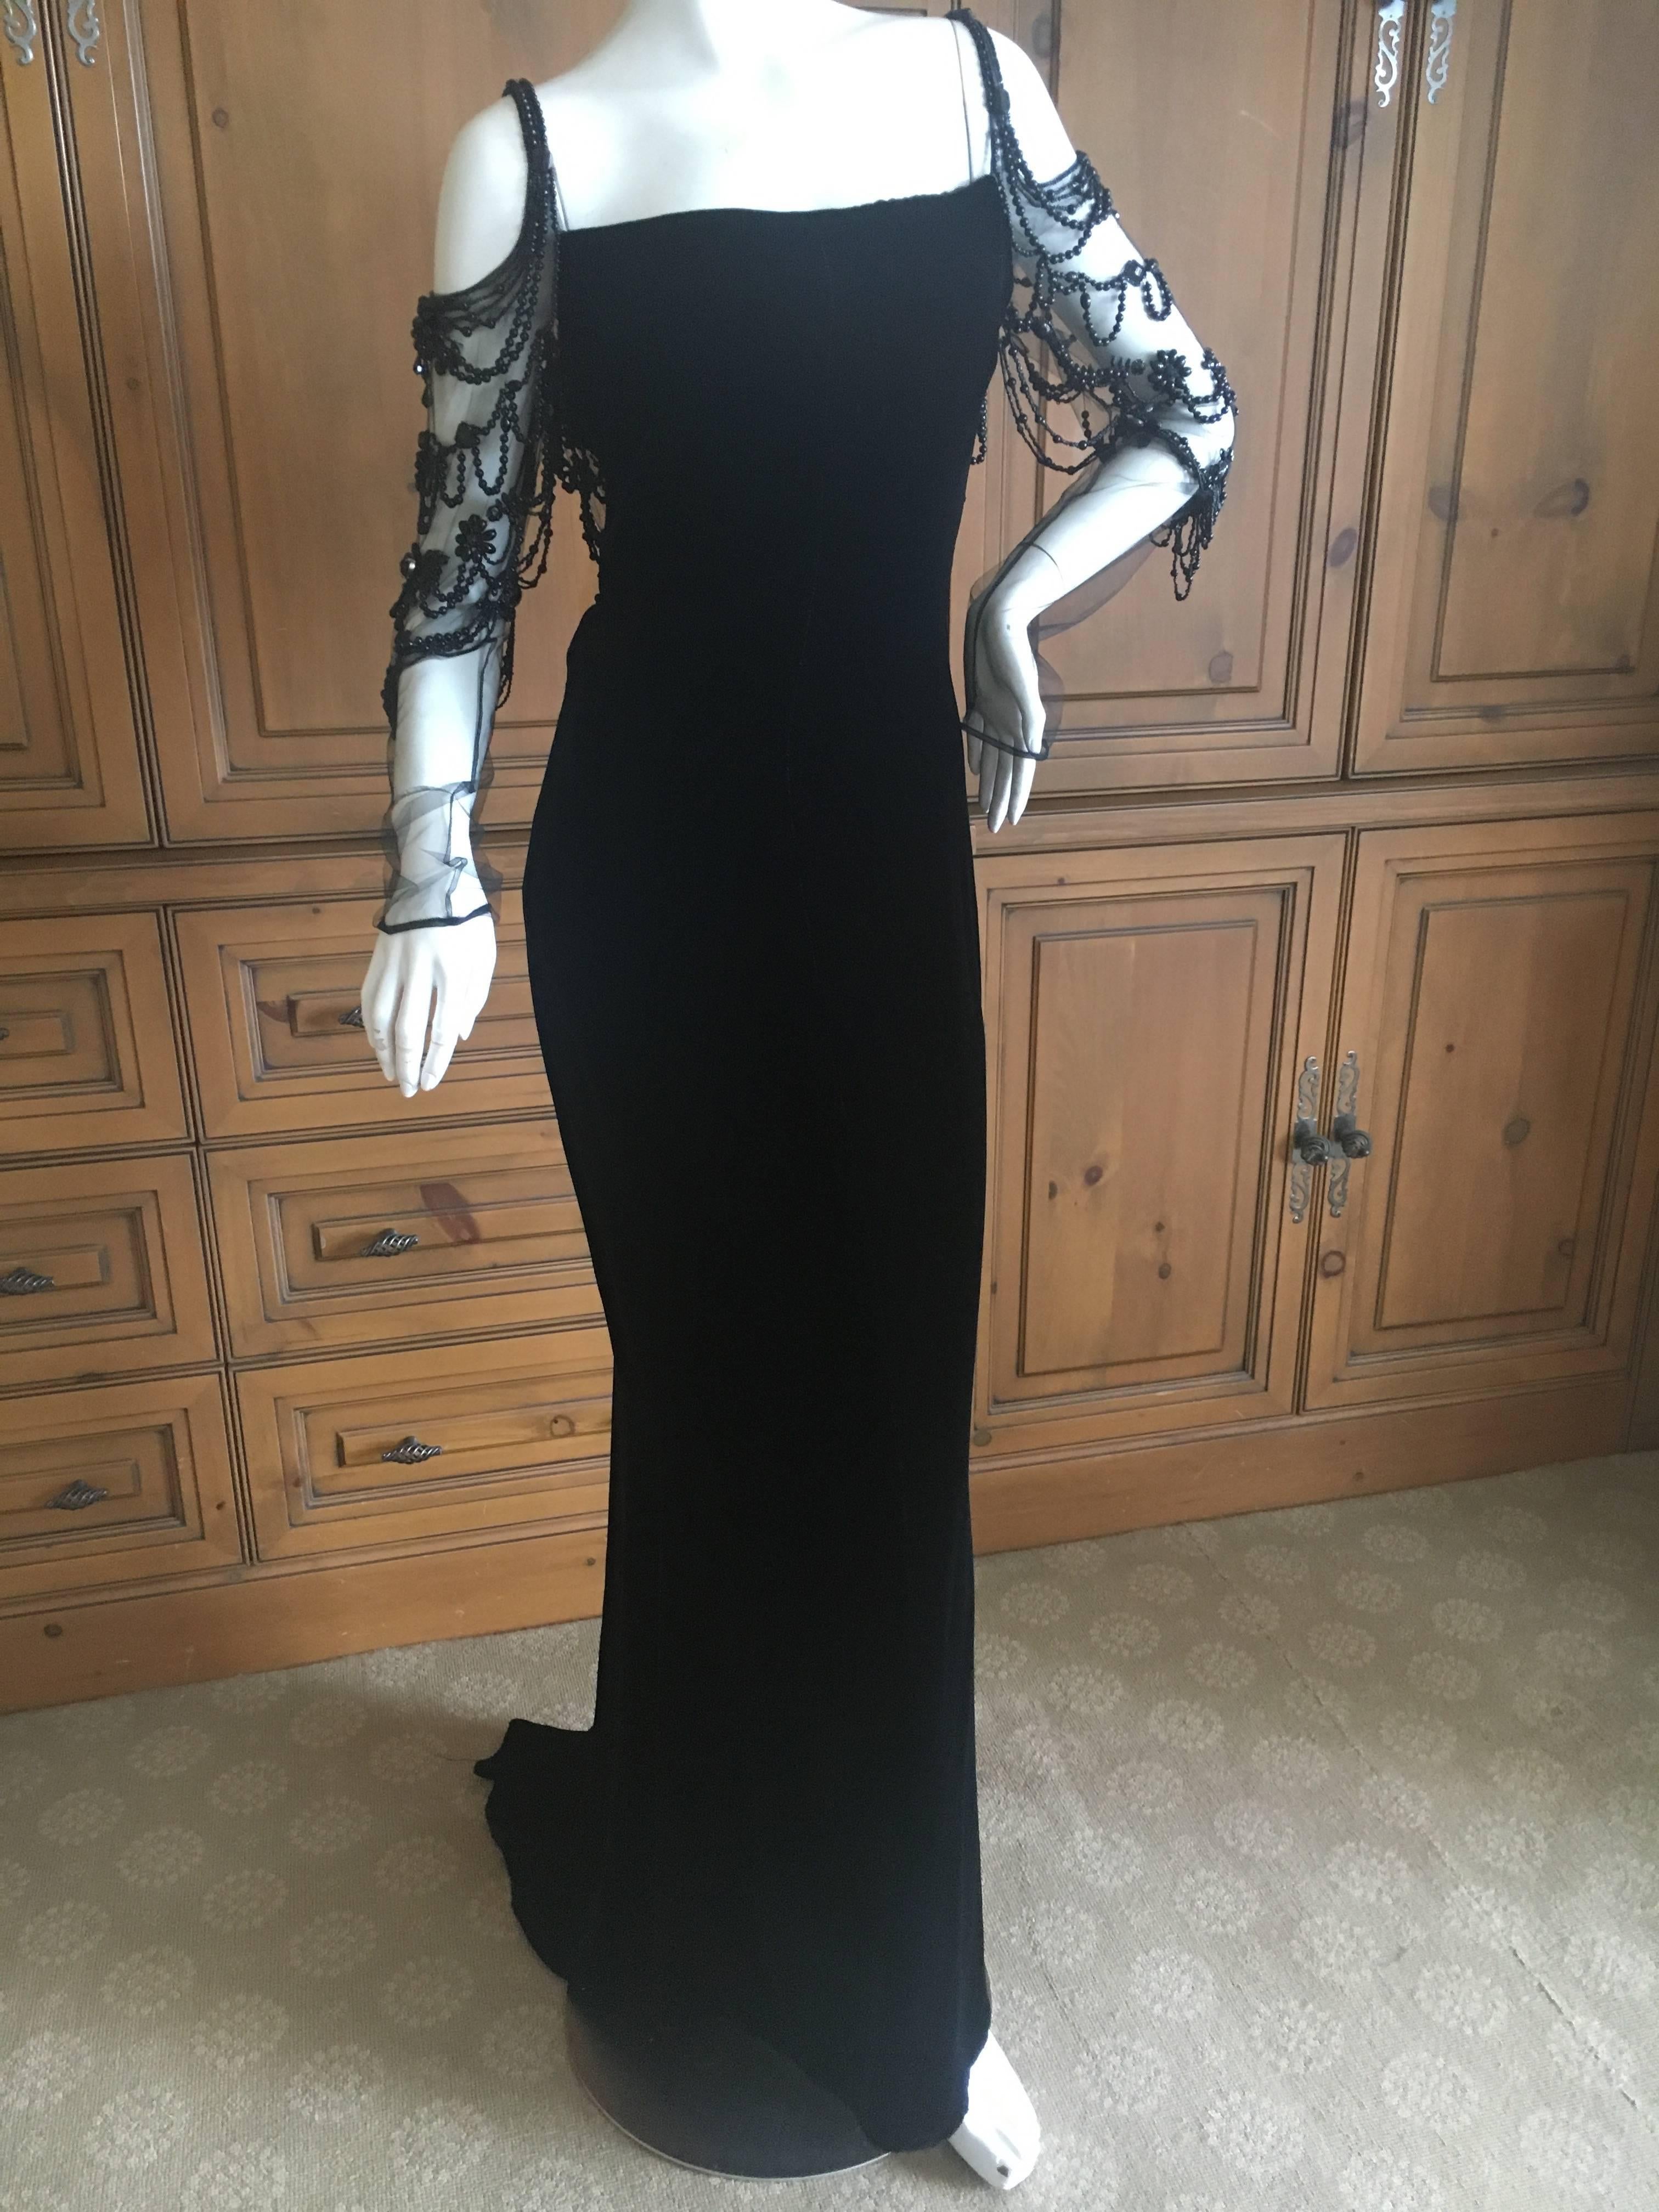 Valentino Vintage Black Velvet Evening Dress with Gorgeous Jet Beading on Net

This is such a charming piece.

Size 6

Bust  36" 

Waist 28" 

Hips 42' 

Length 60" Front

Length 64" in back

Great pre owned condition, minor bead